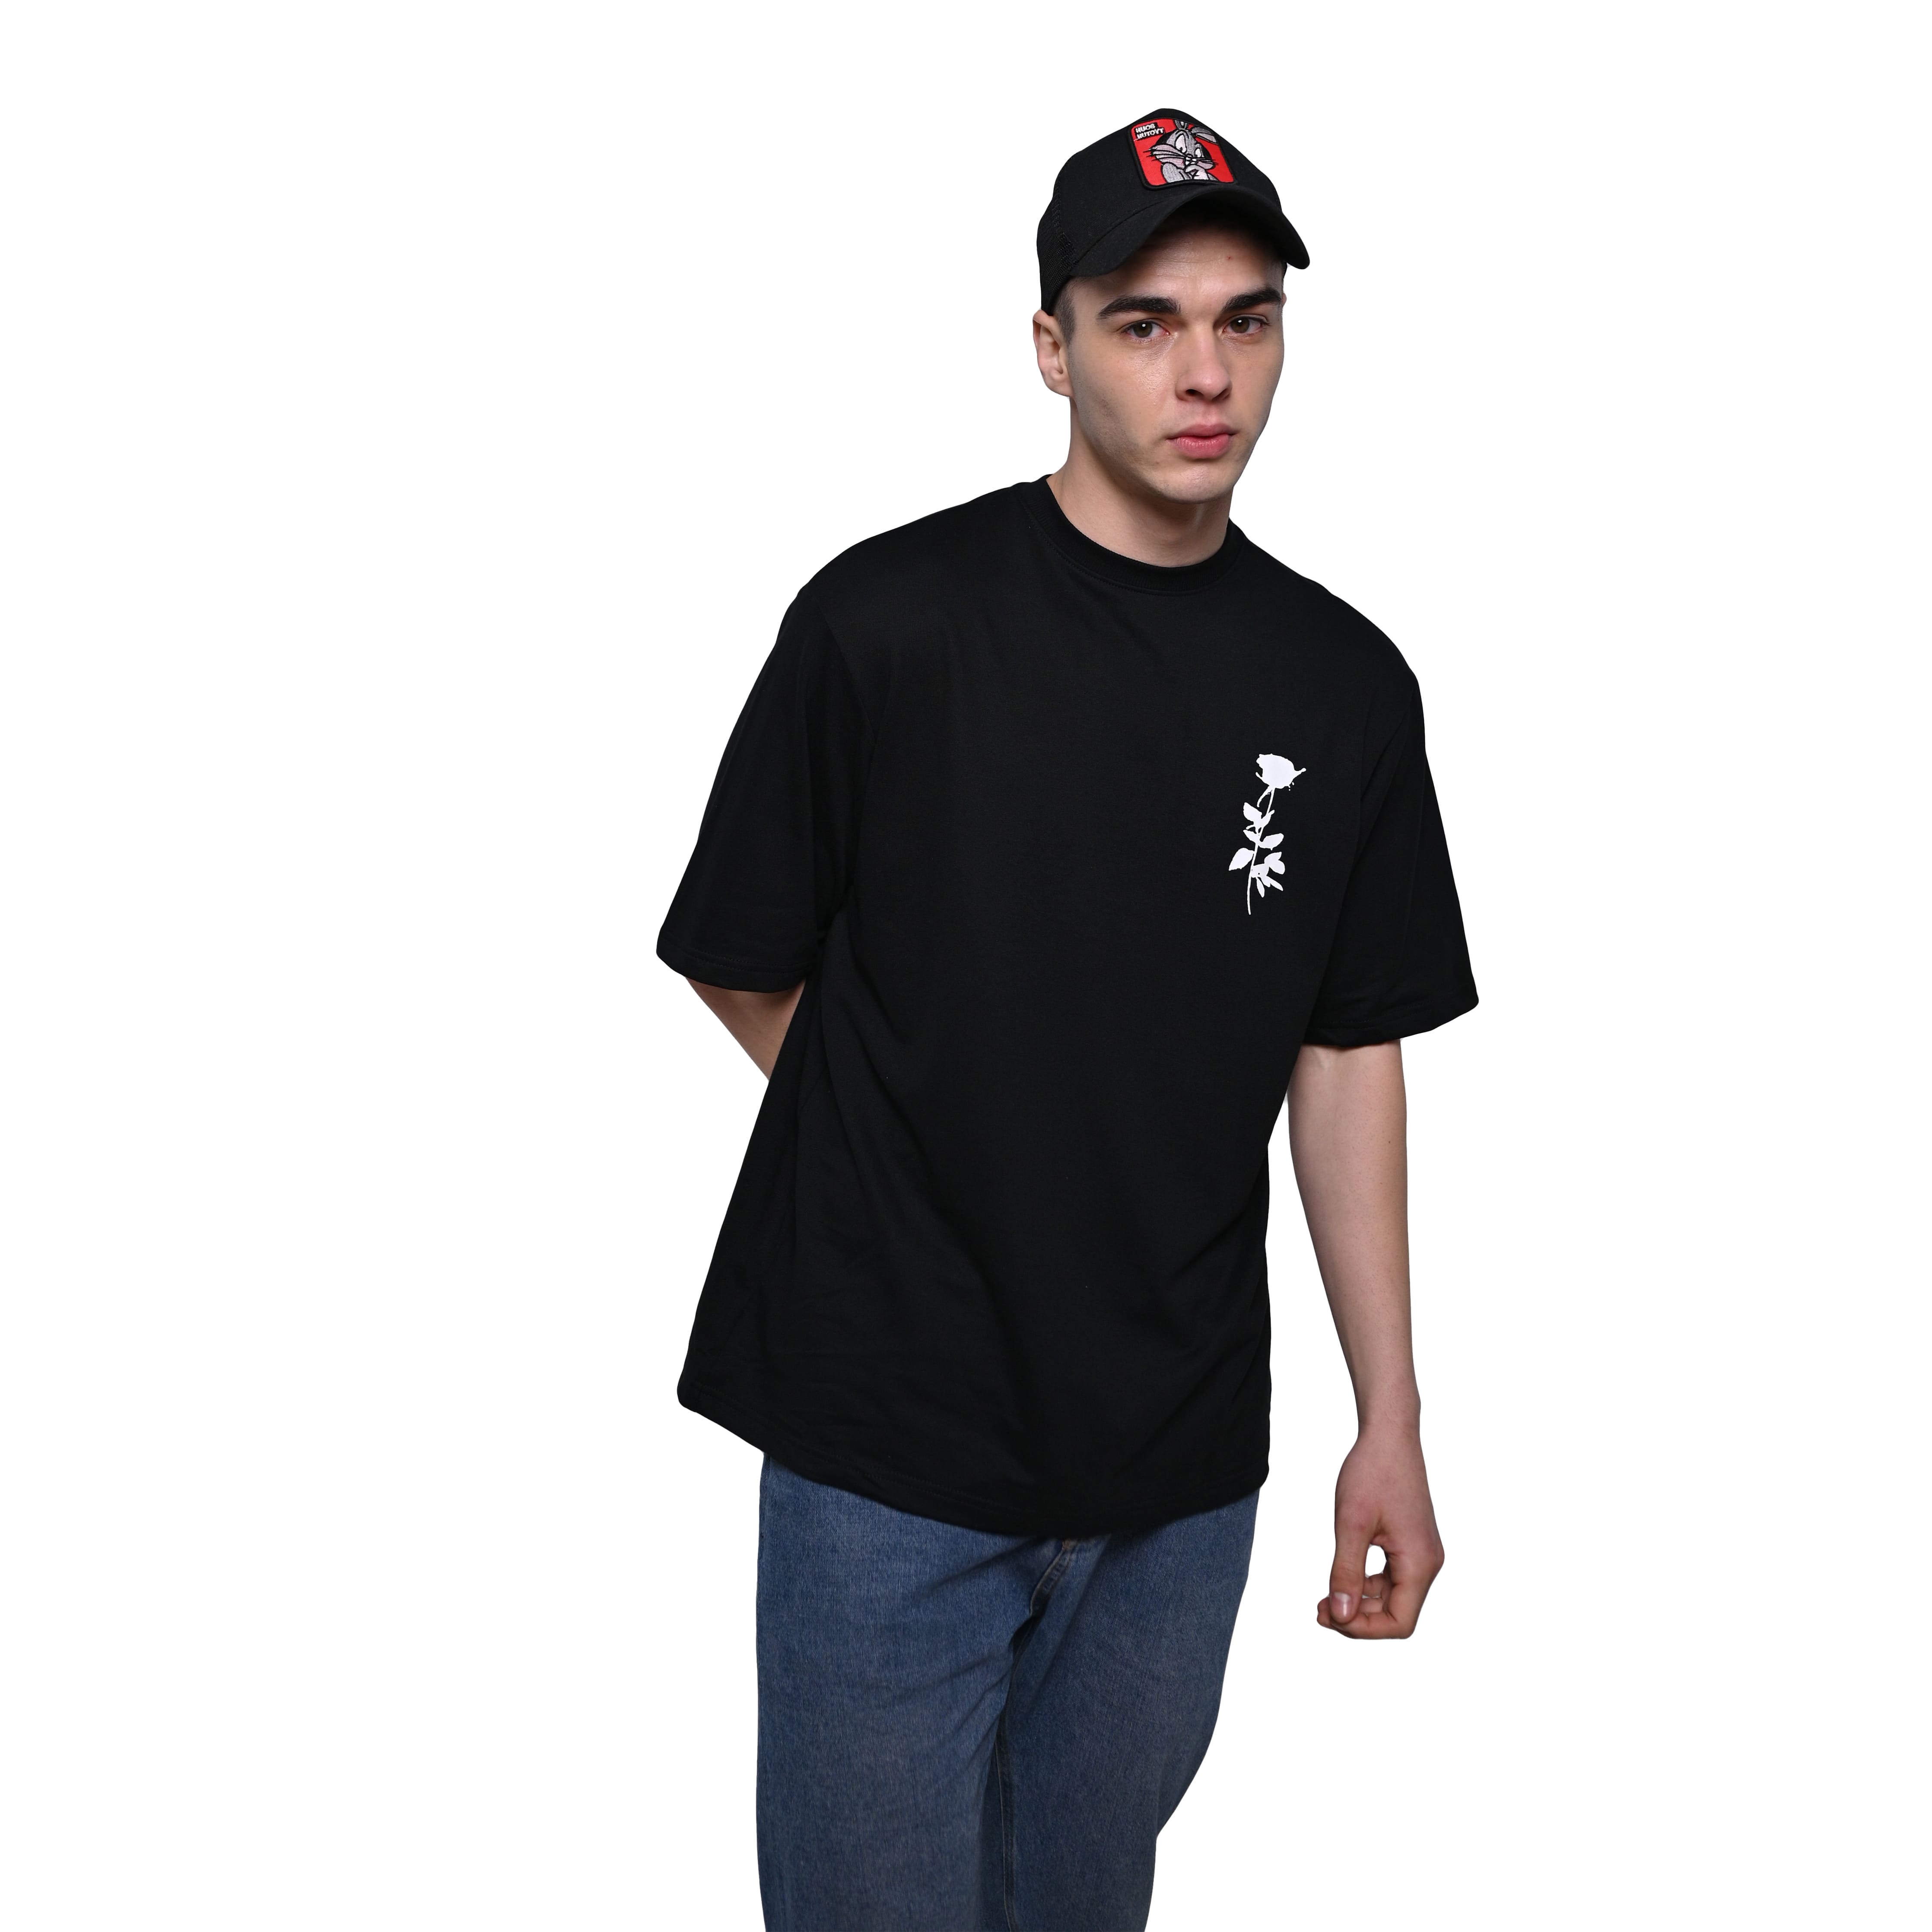 Oversized Black t-shirt with Afterthought style print on the front side